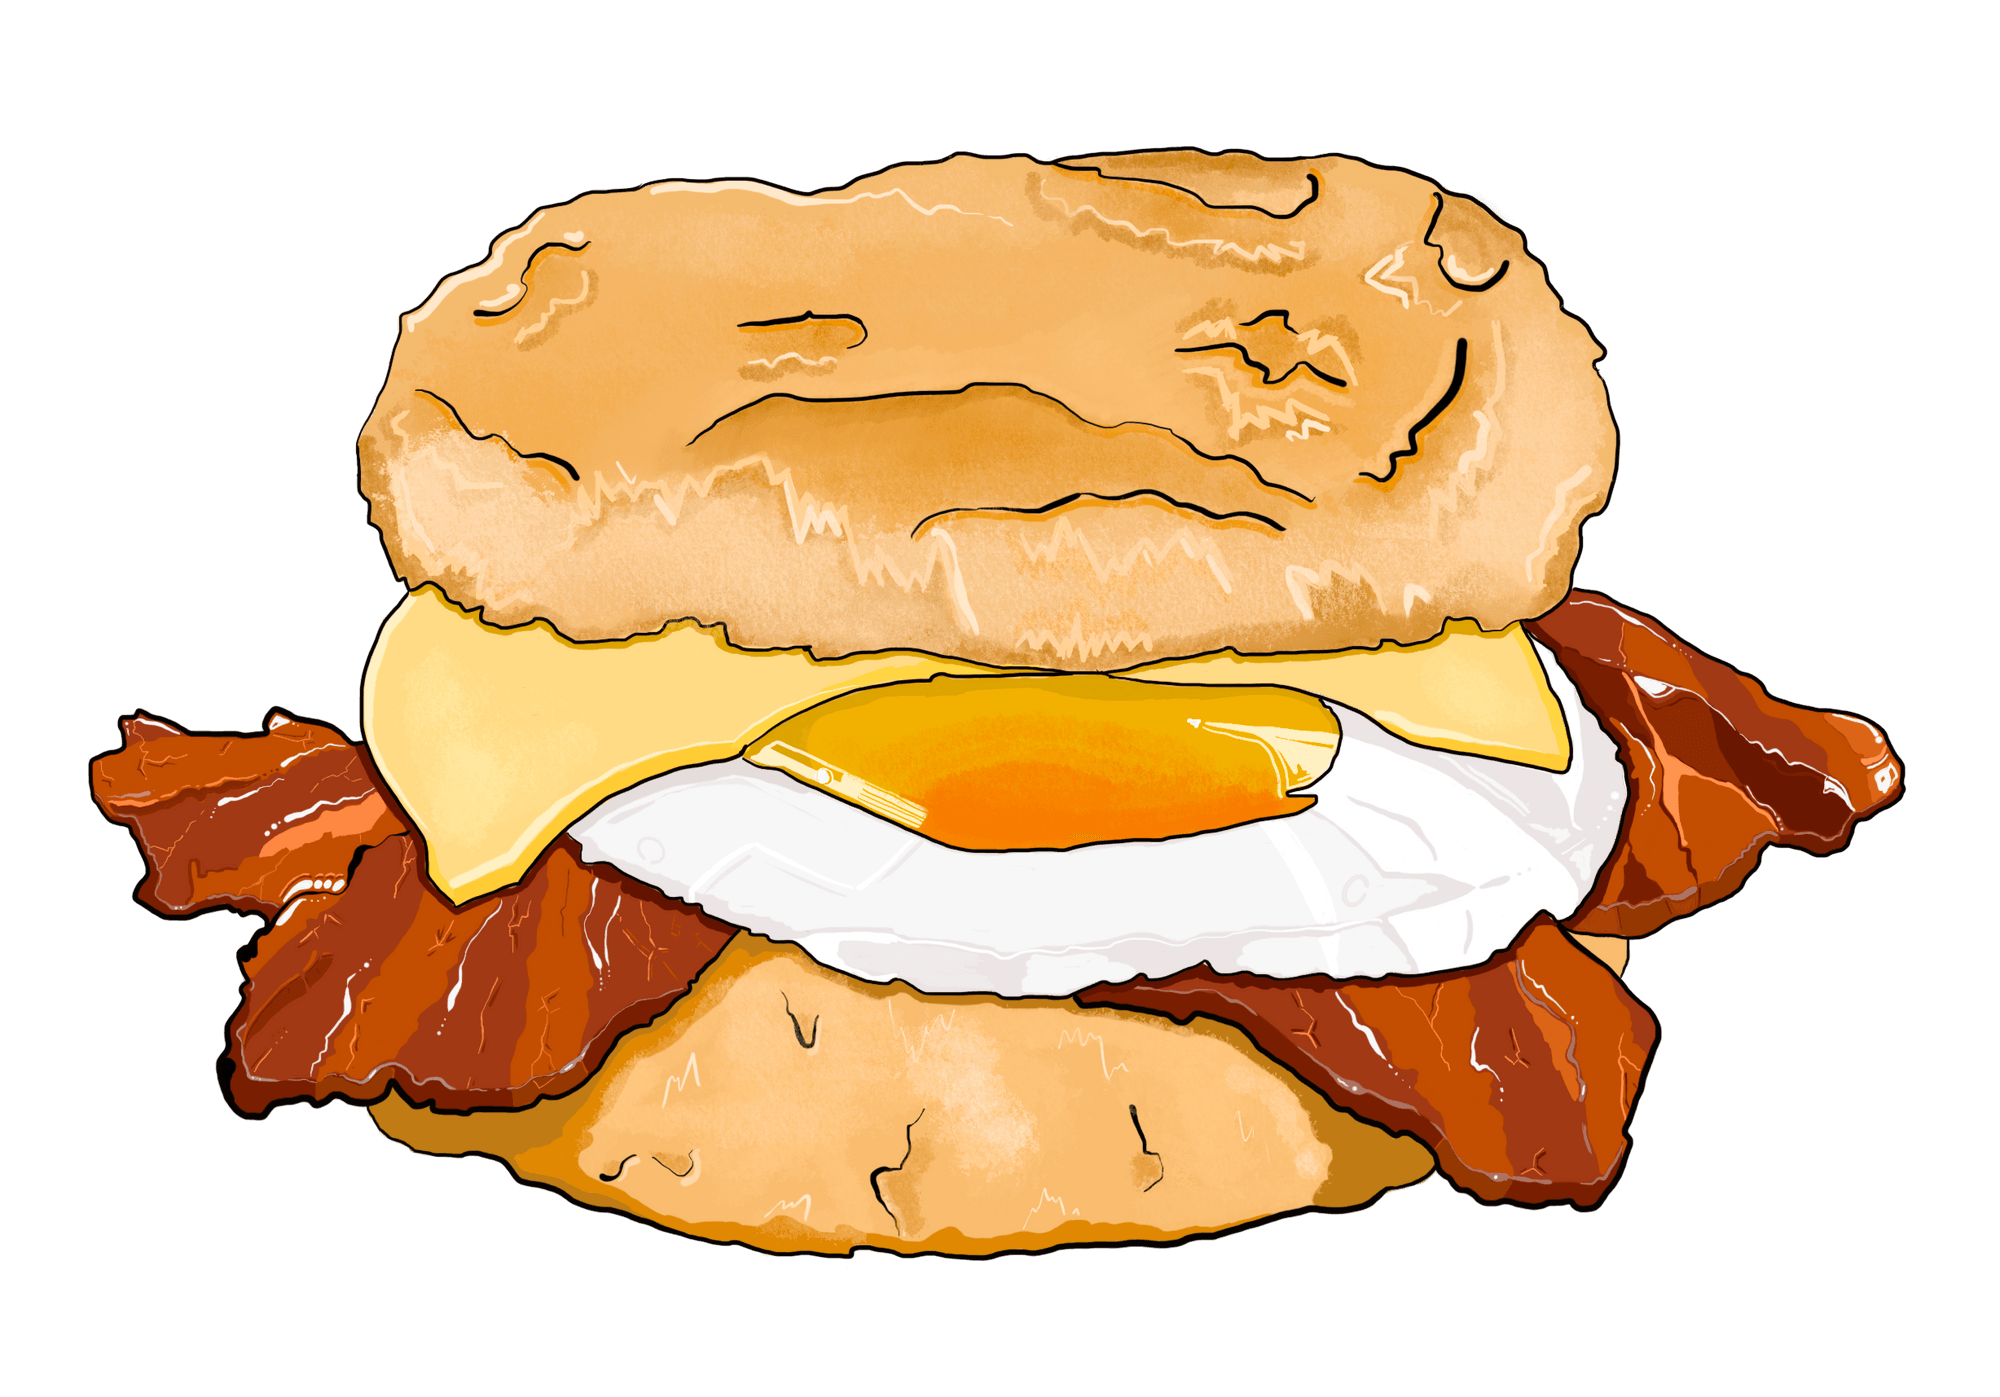 bacon roll clipart